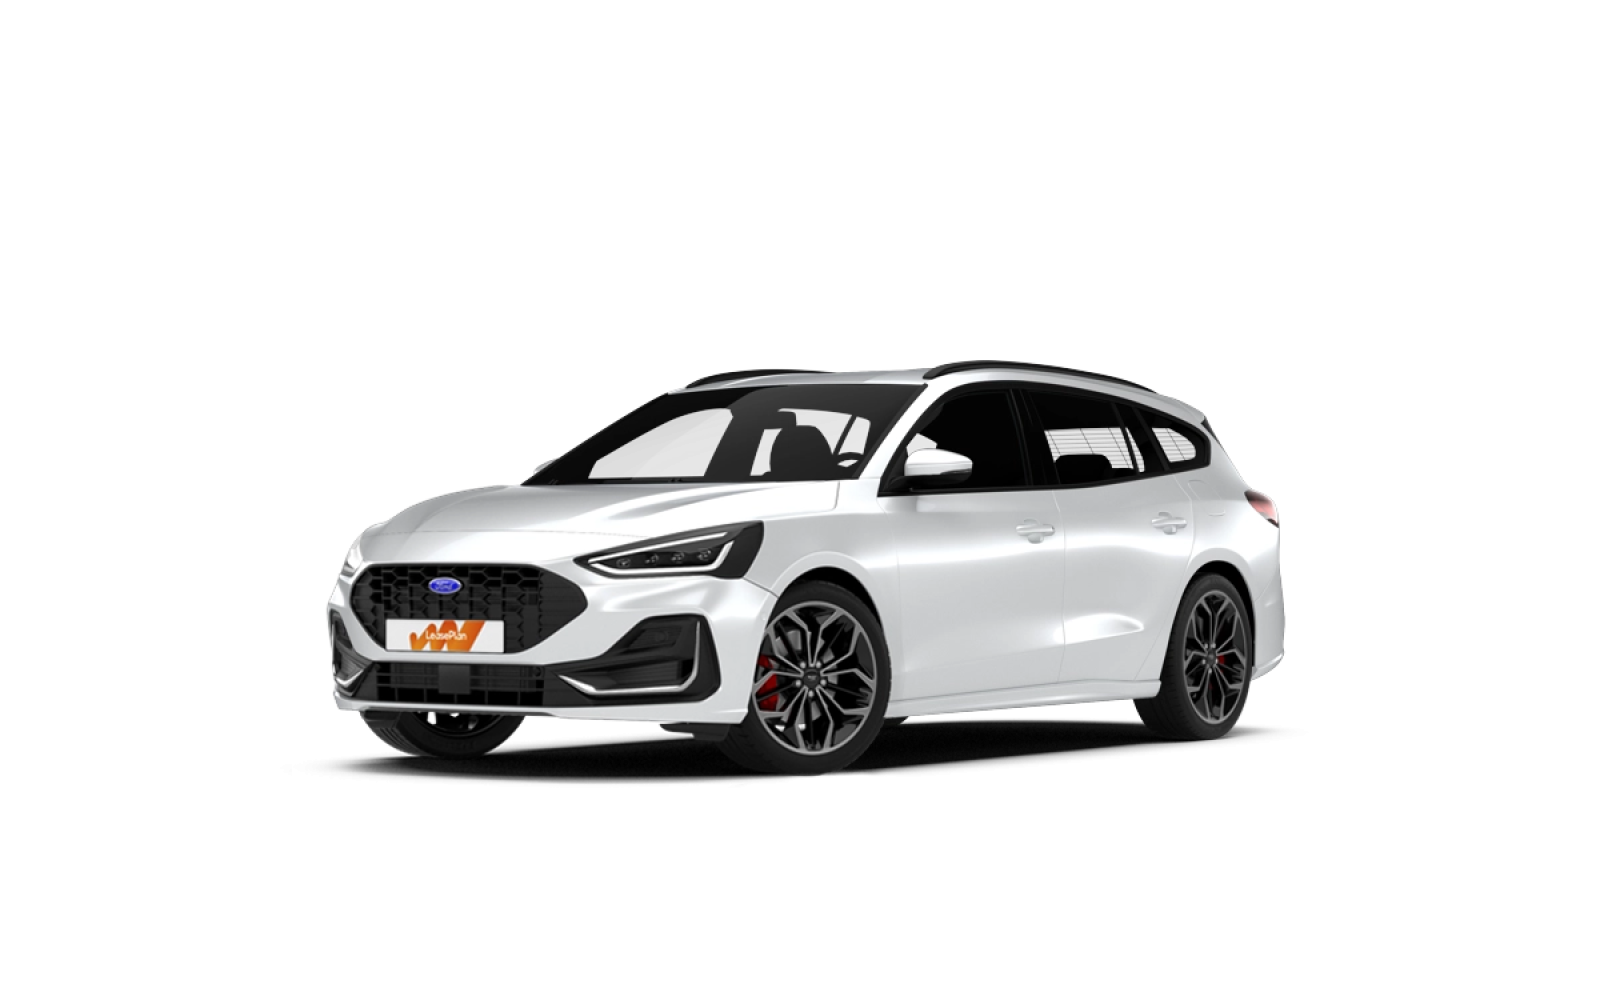 FORD Focus 1,0 EcoBoost MHEV 92kW/125k A7 Titanium large 2660 - operativní leasing